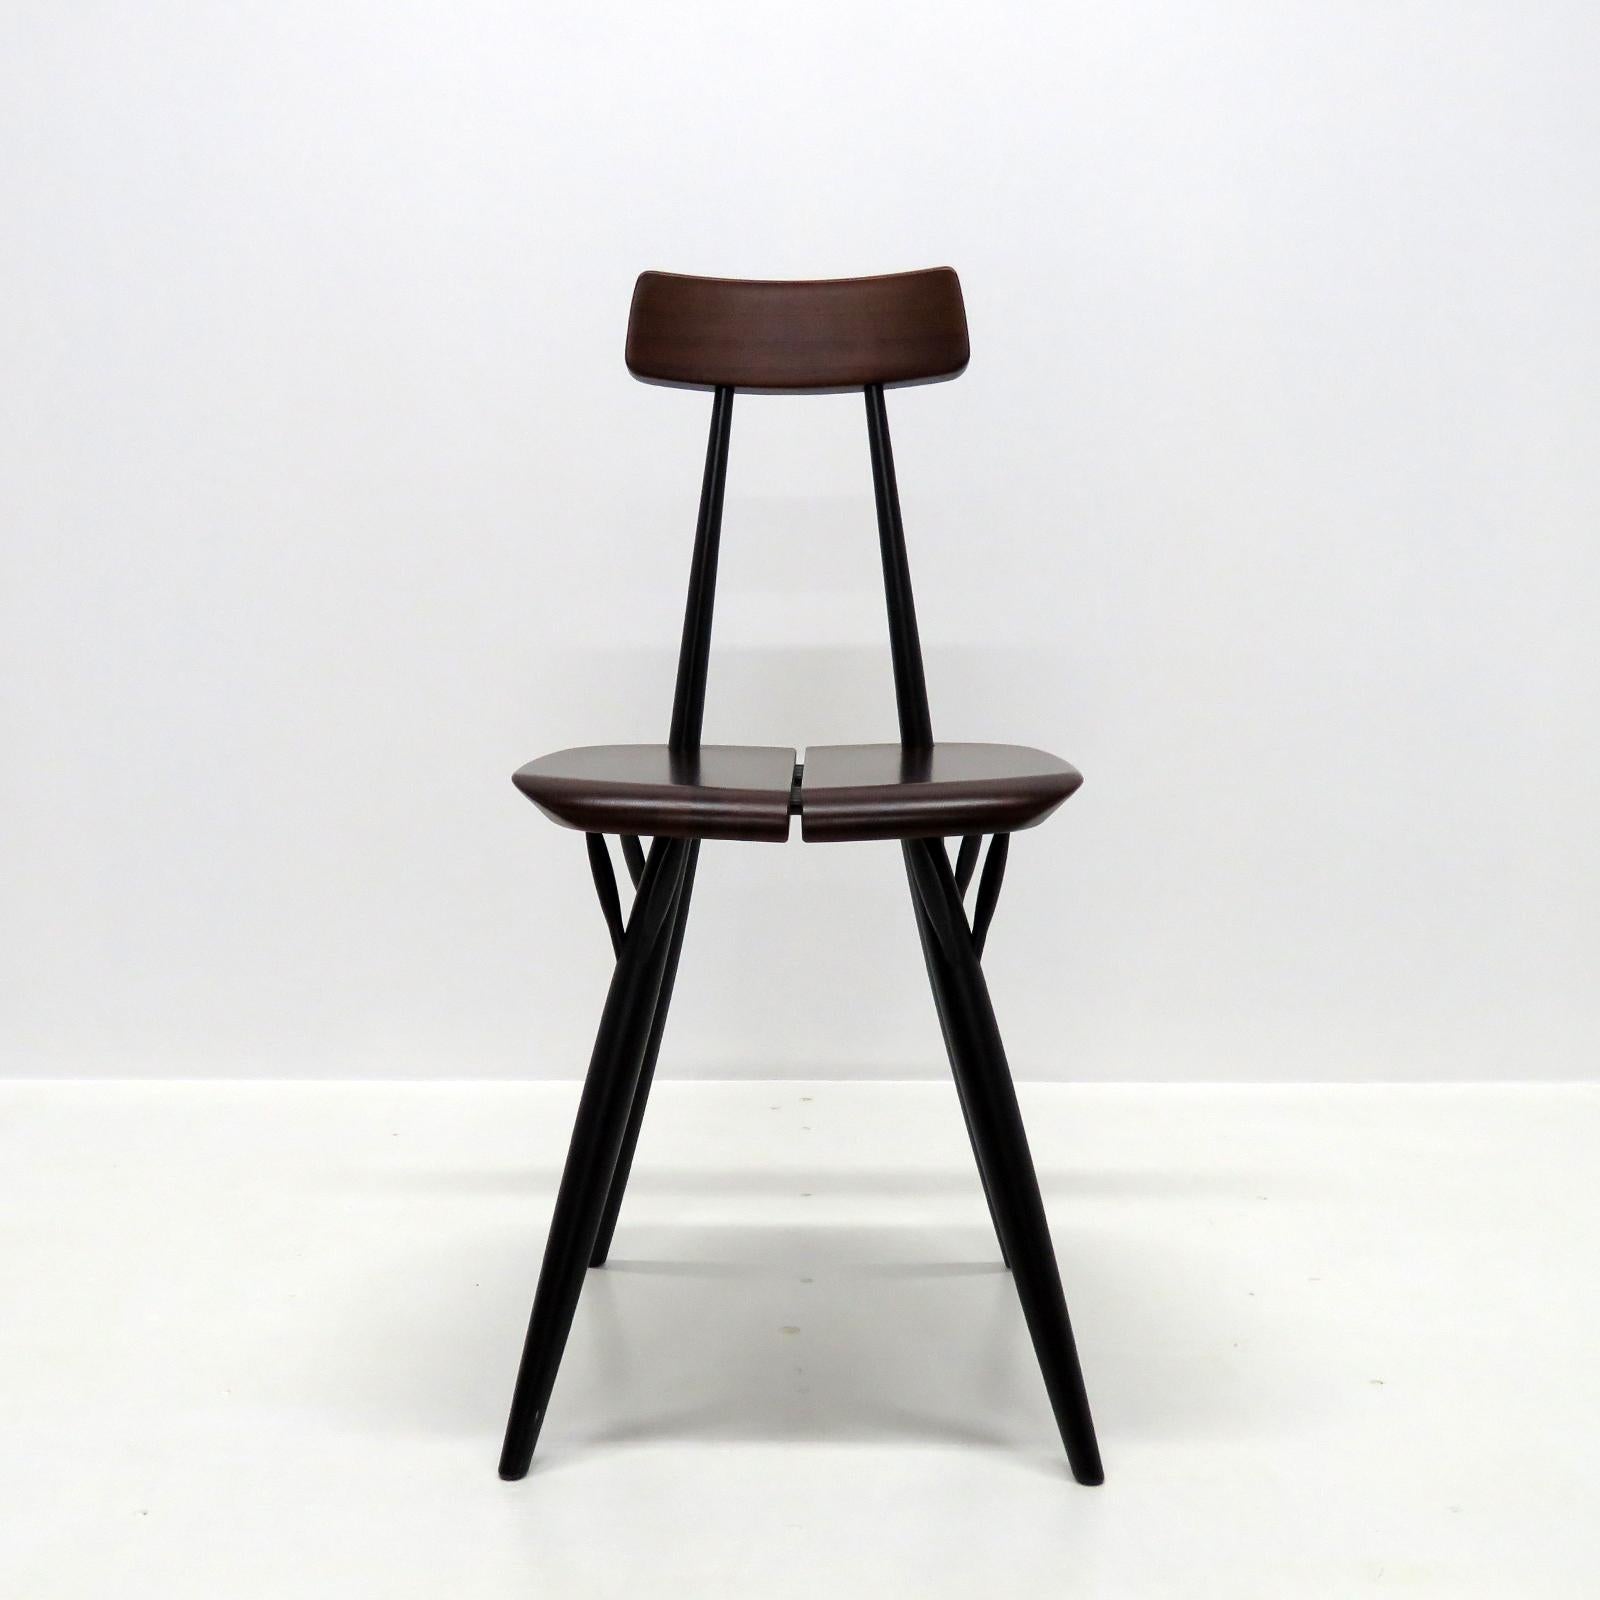 Wonderful chairs designed by Ilmari Tapiovaara for Laukaan Puu, Finland 1955 in dark stained pinewood and black lacquered dowel legs, marked. Priced individually.